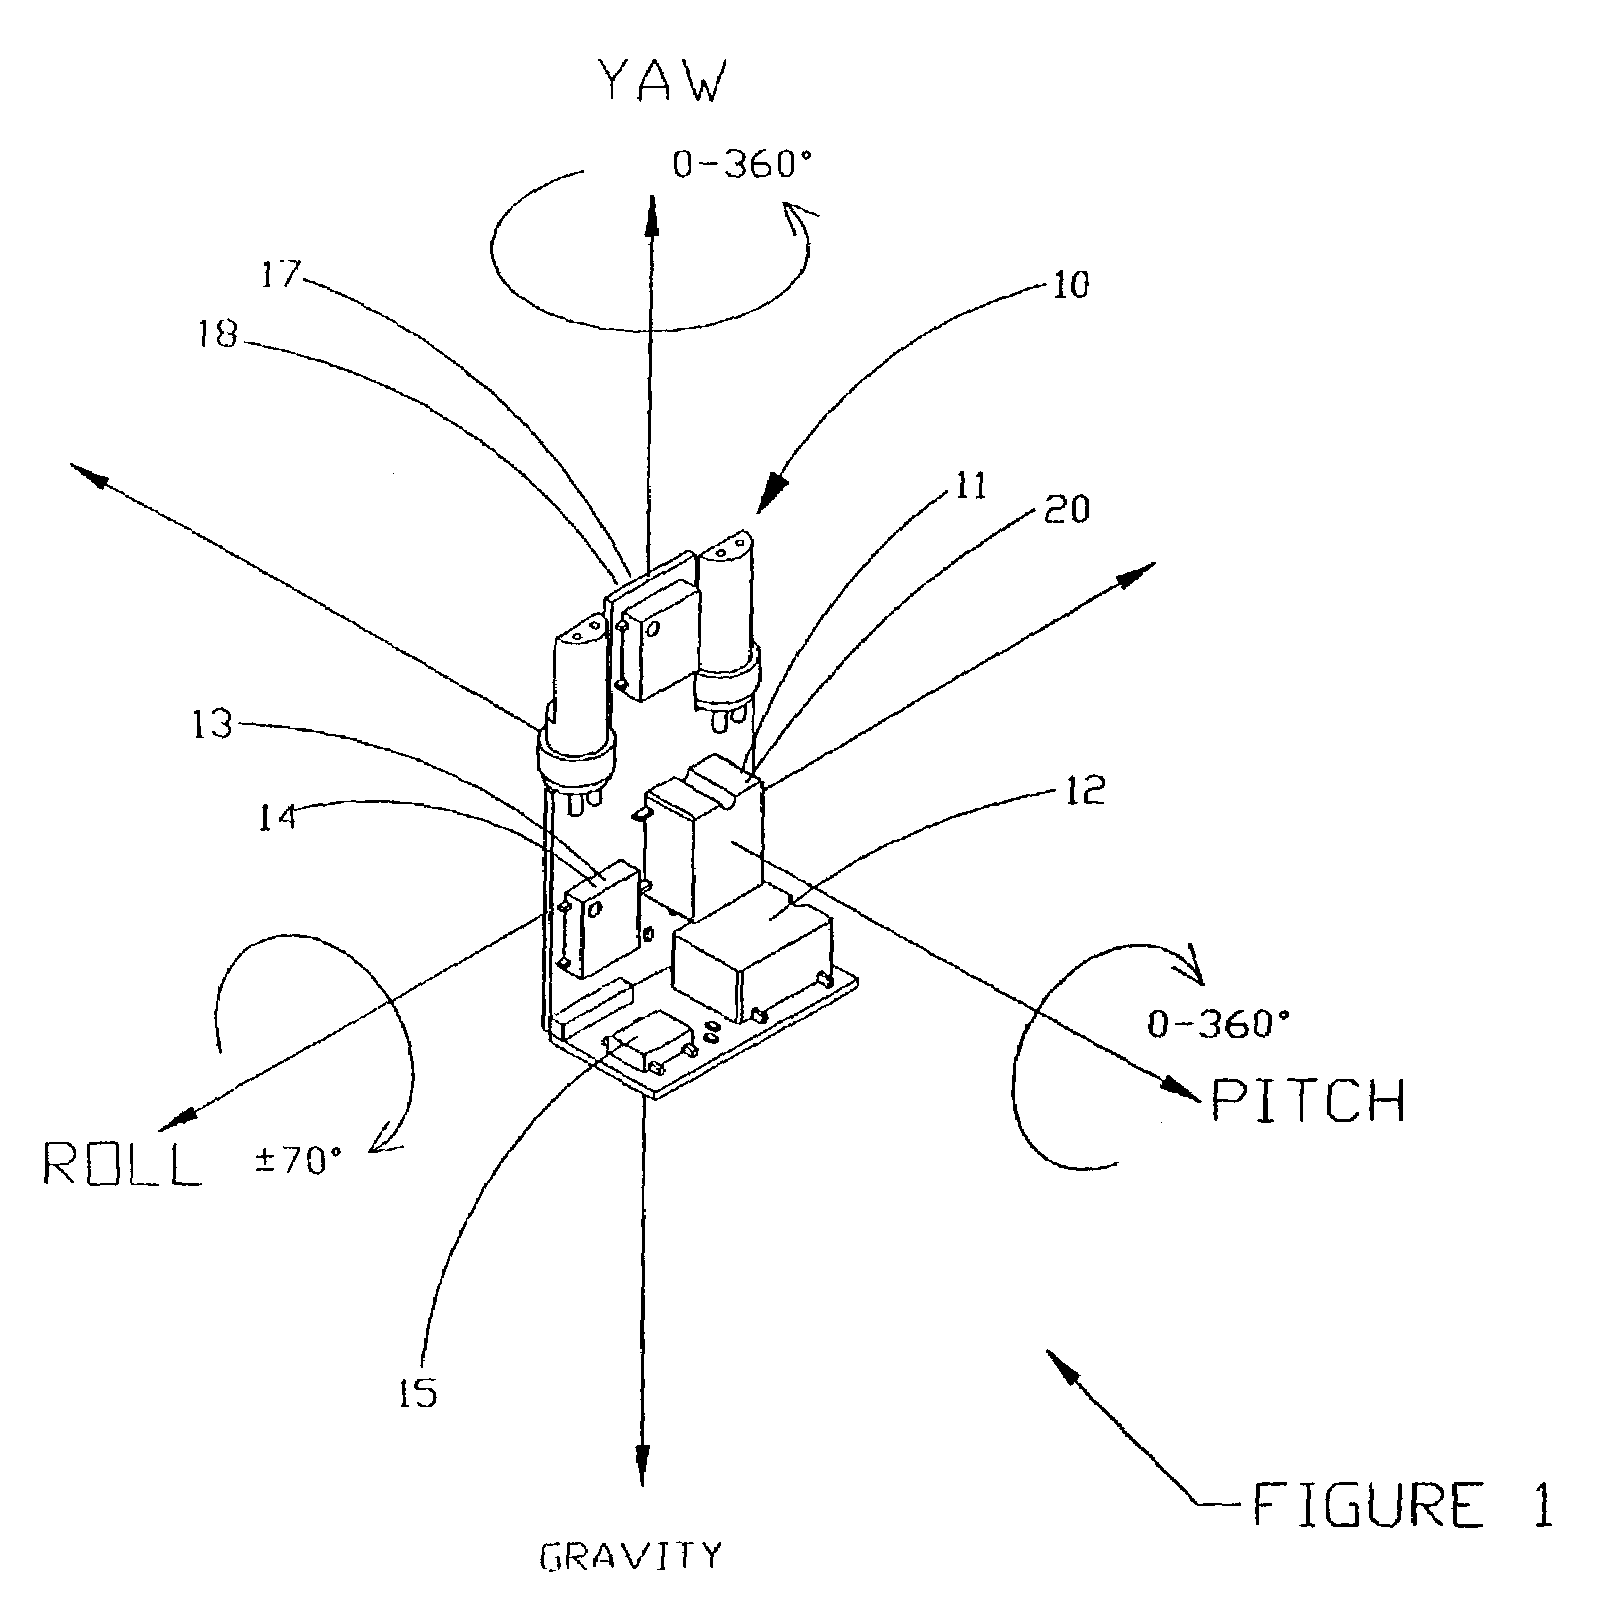 Solid state orientation sensor with 360 degree measurement capability